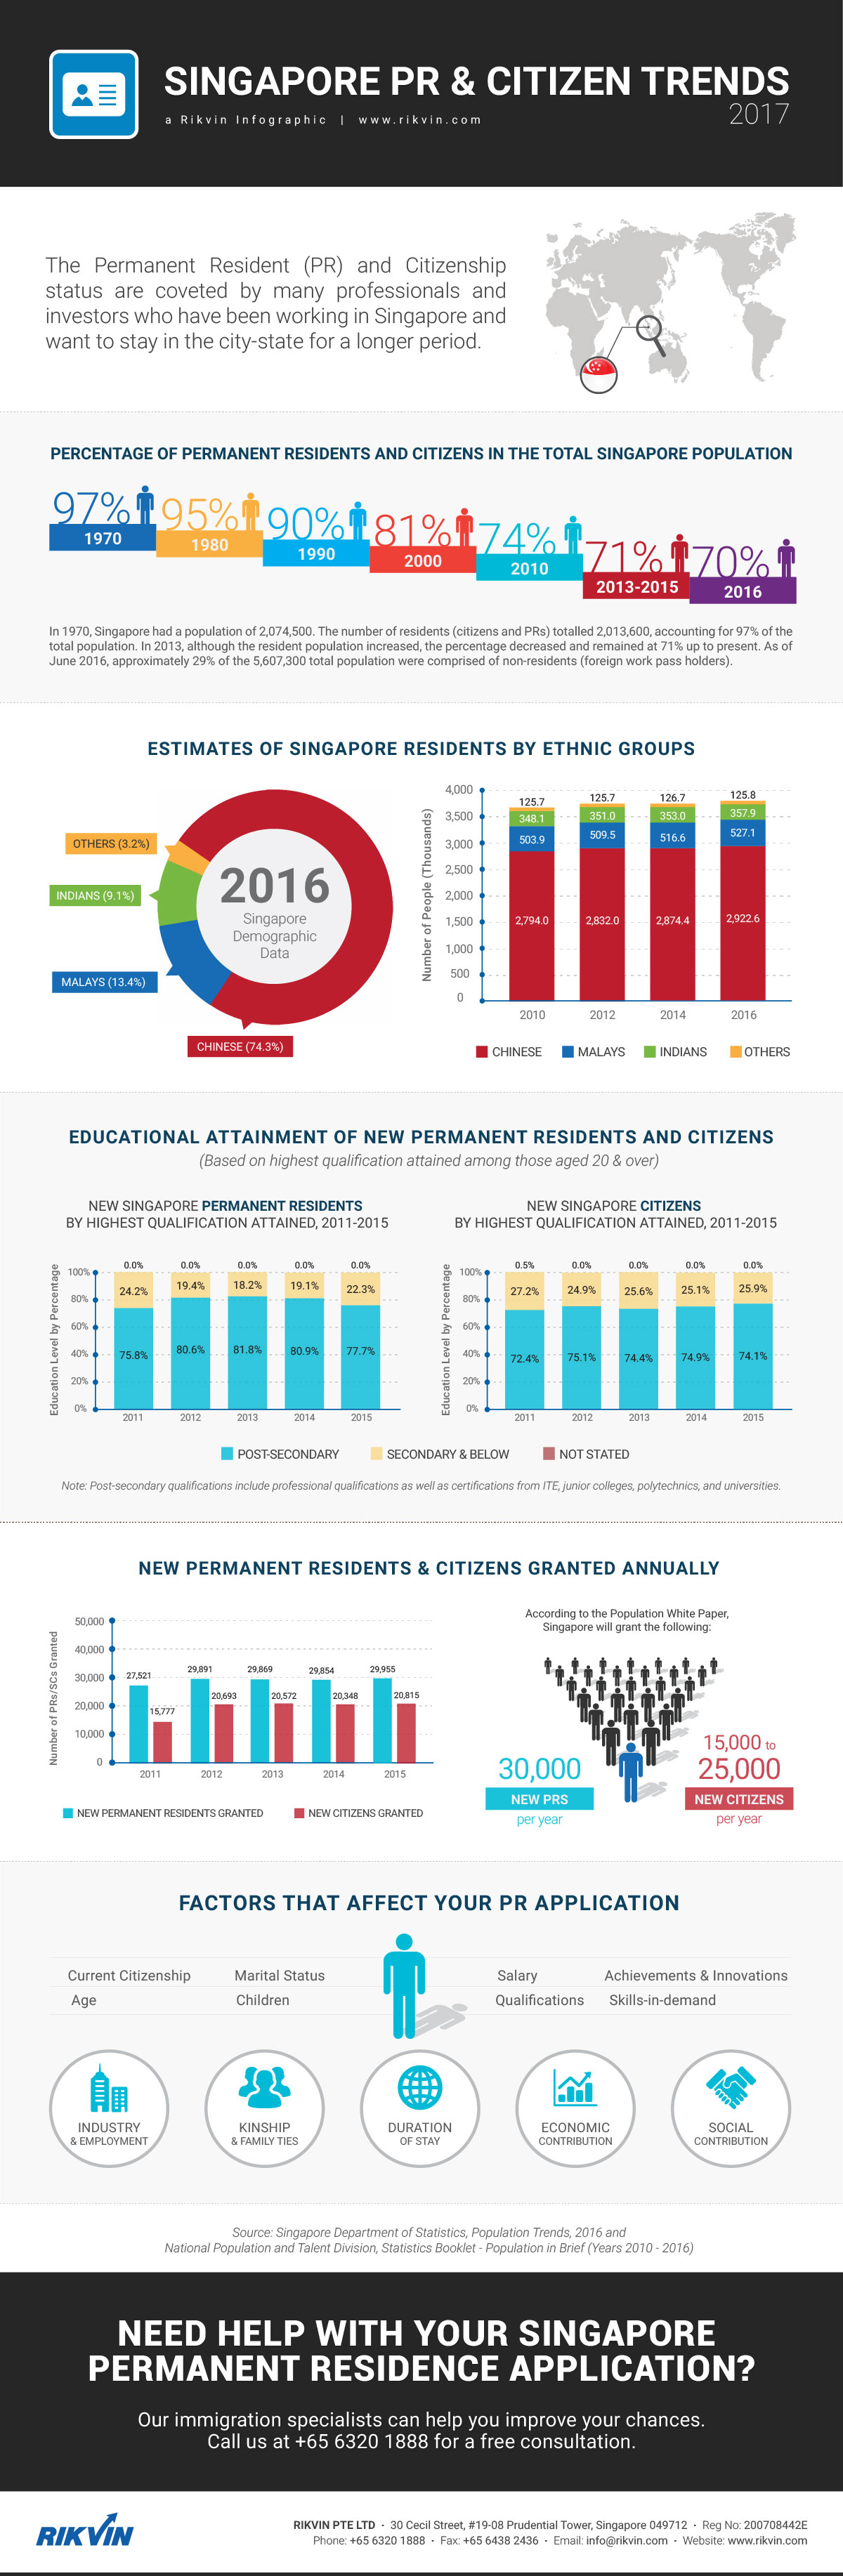 singapore permanent resident and citizen trends 2017